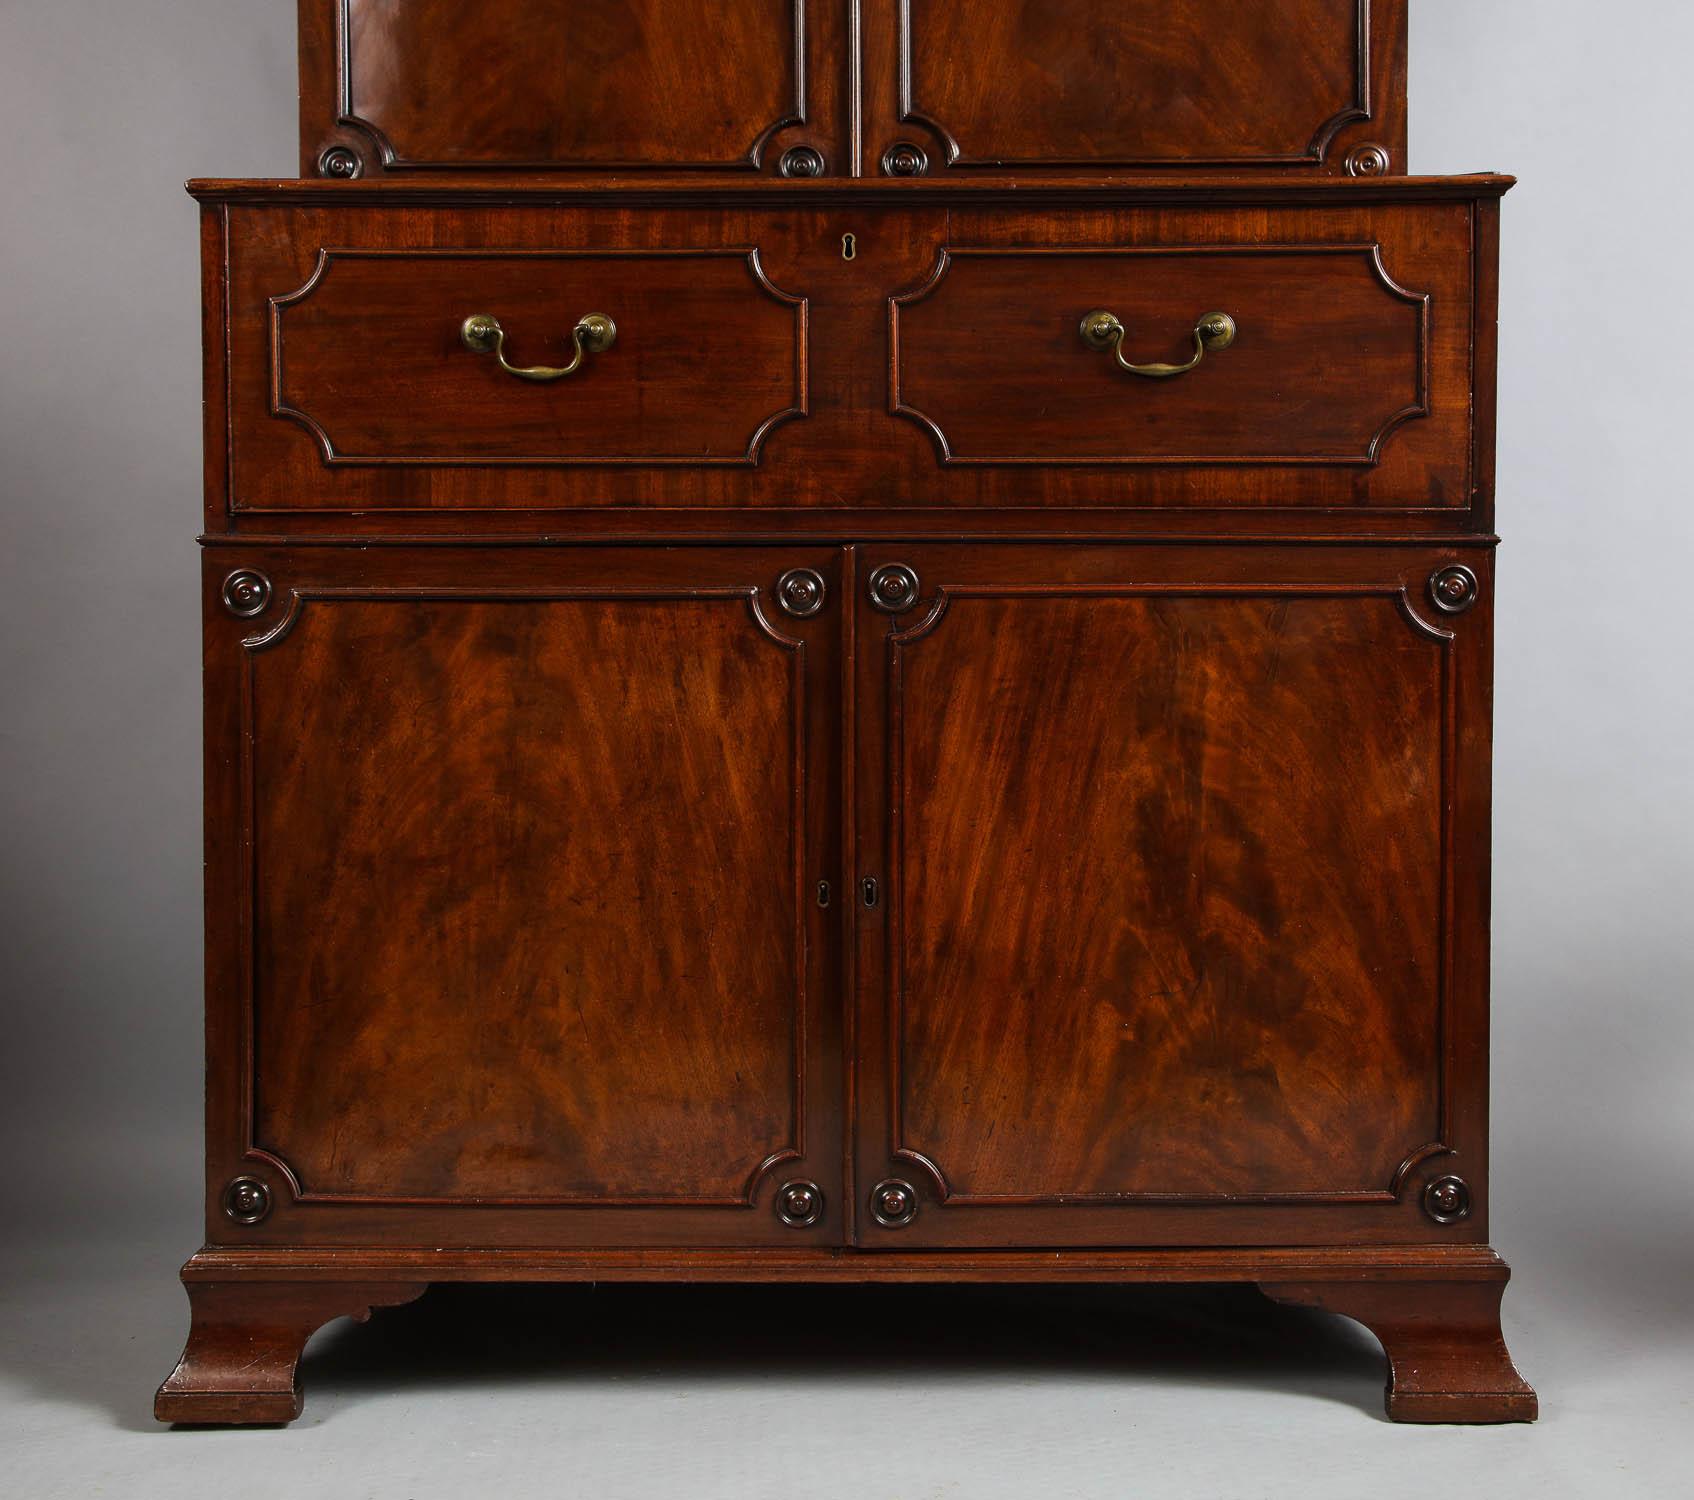 Mahogany Paxton House Secretaire, by Thomas Chippendale